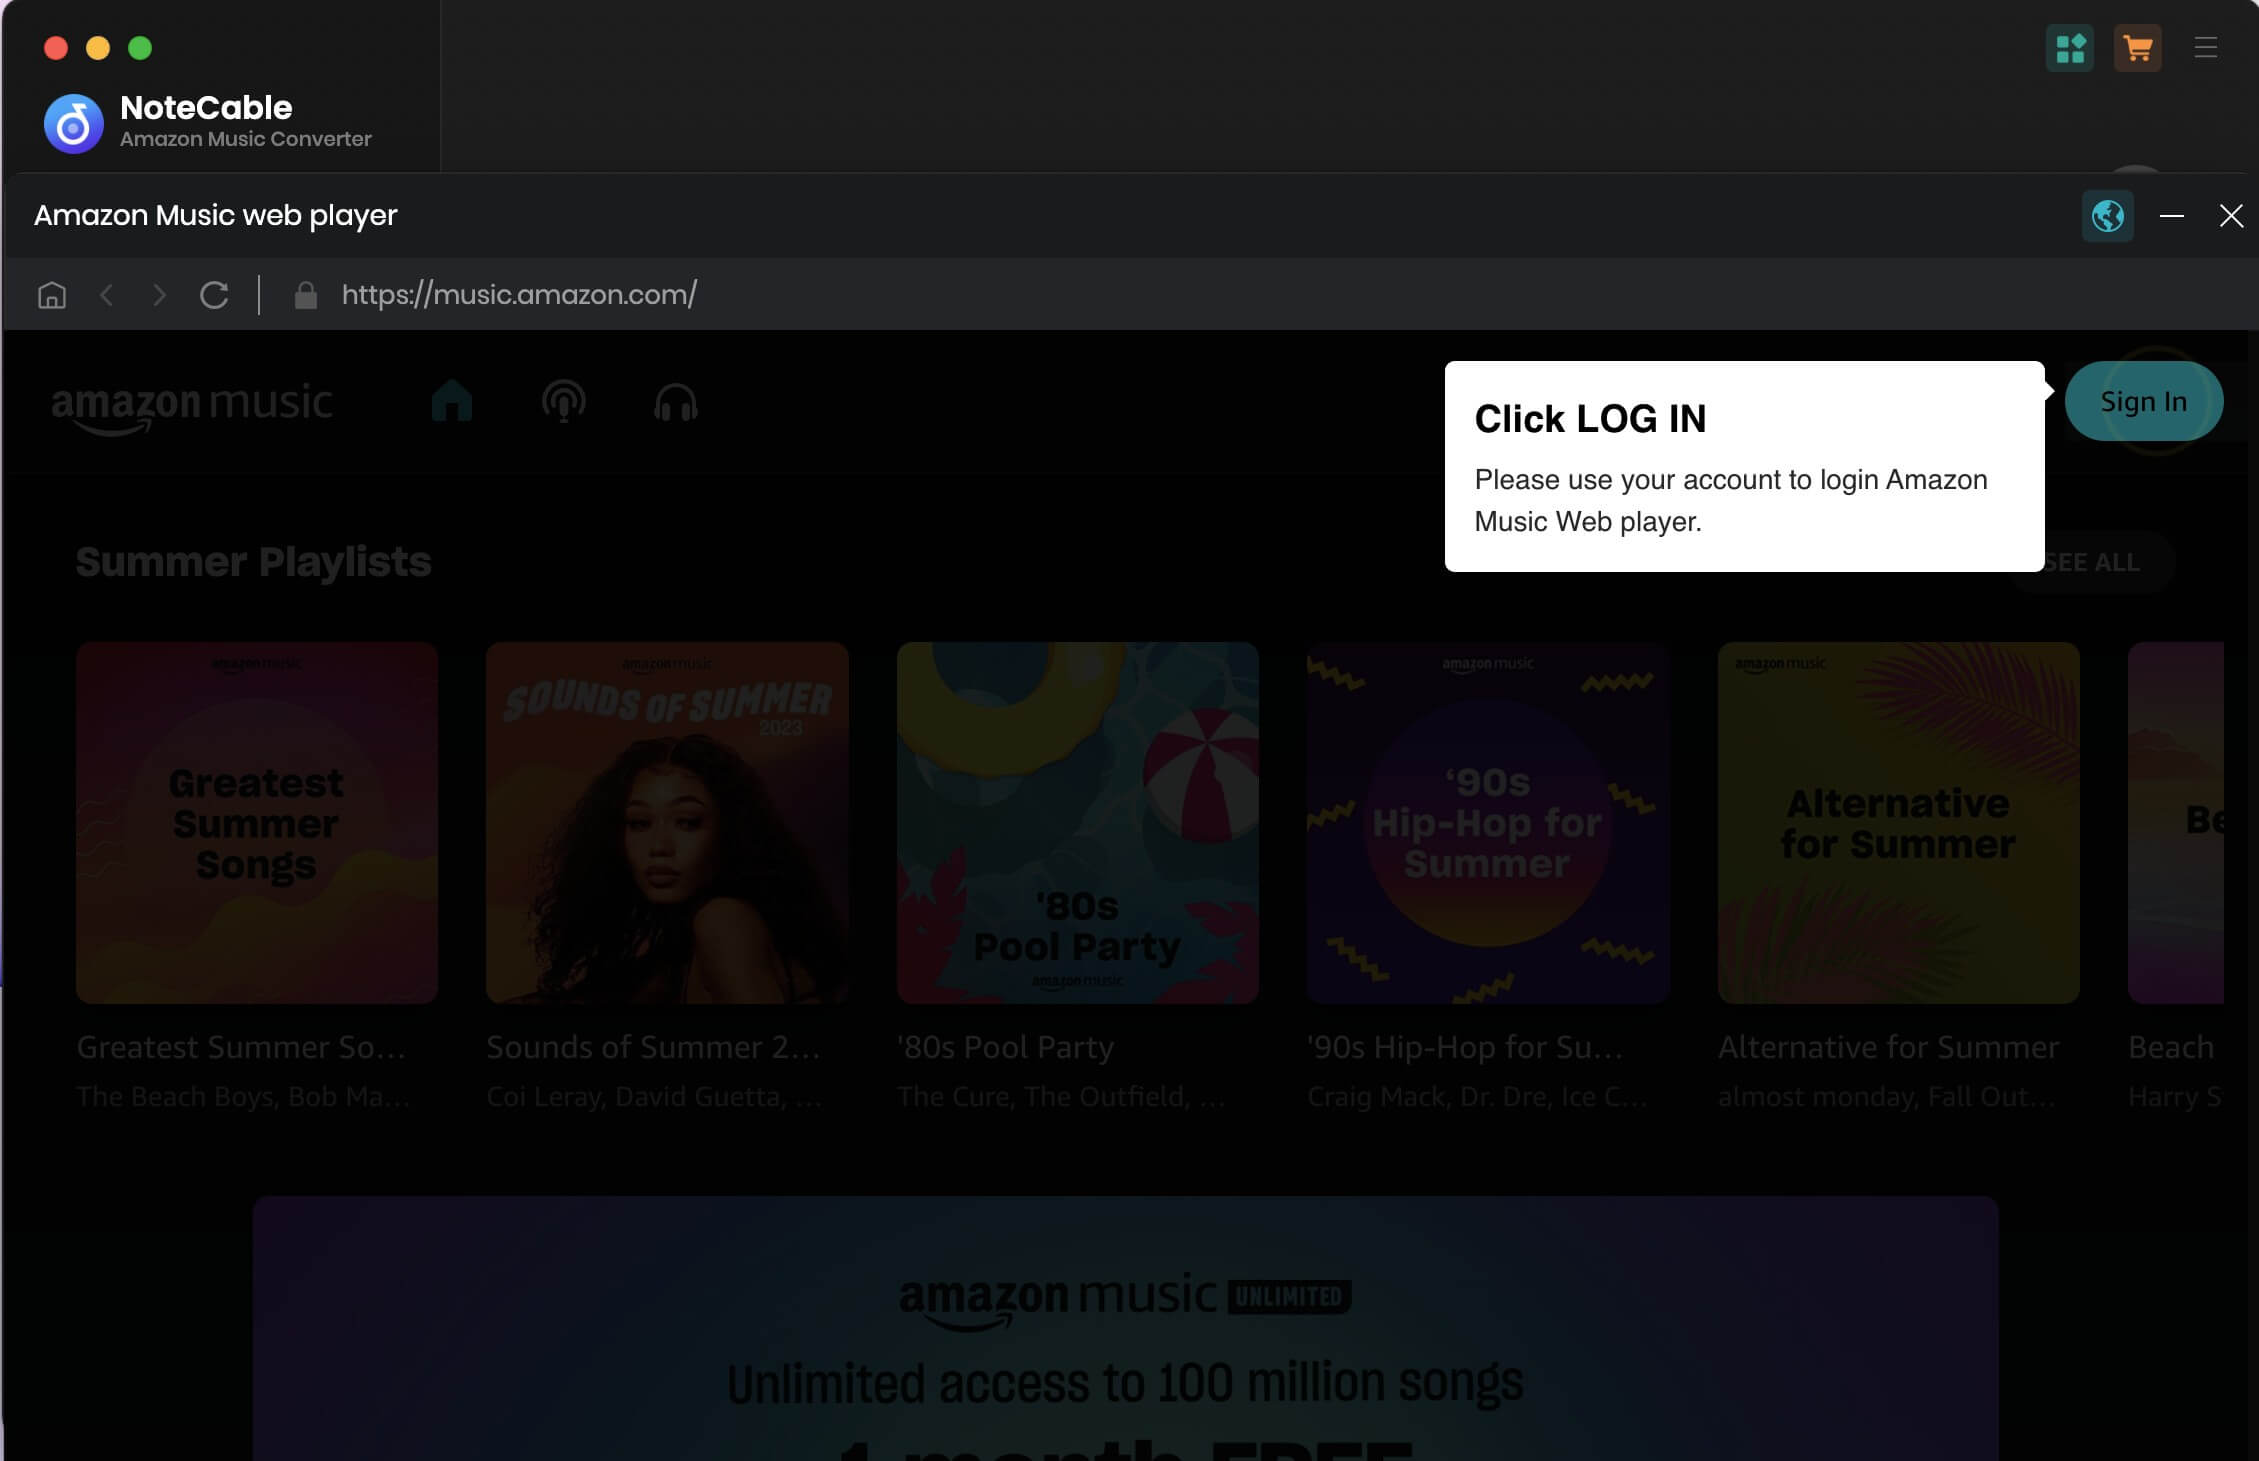 Log in Amazon Music account on NoteCable